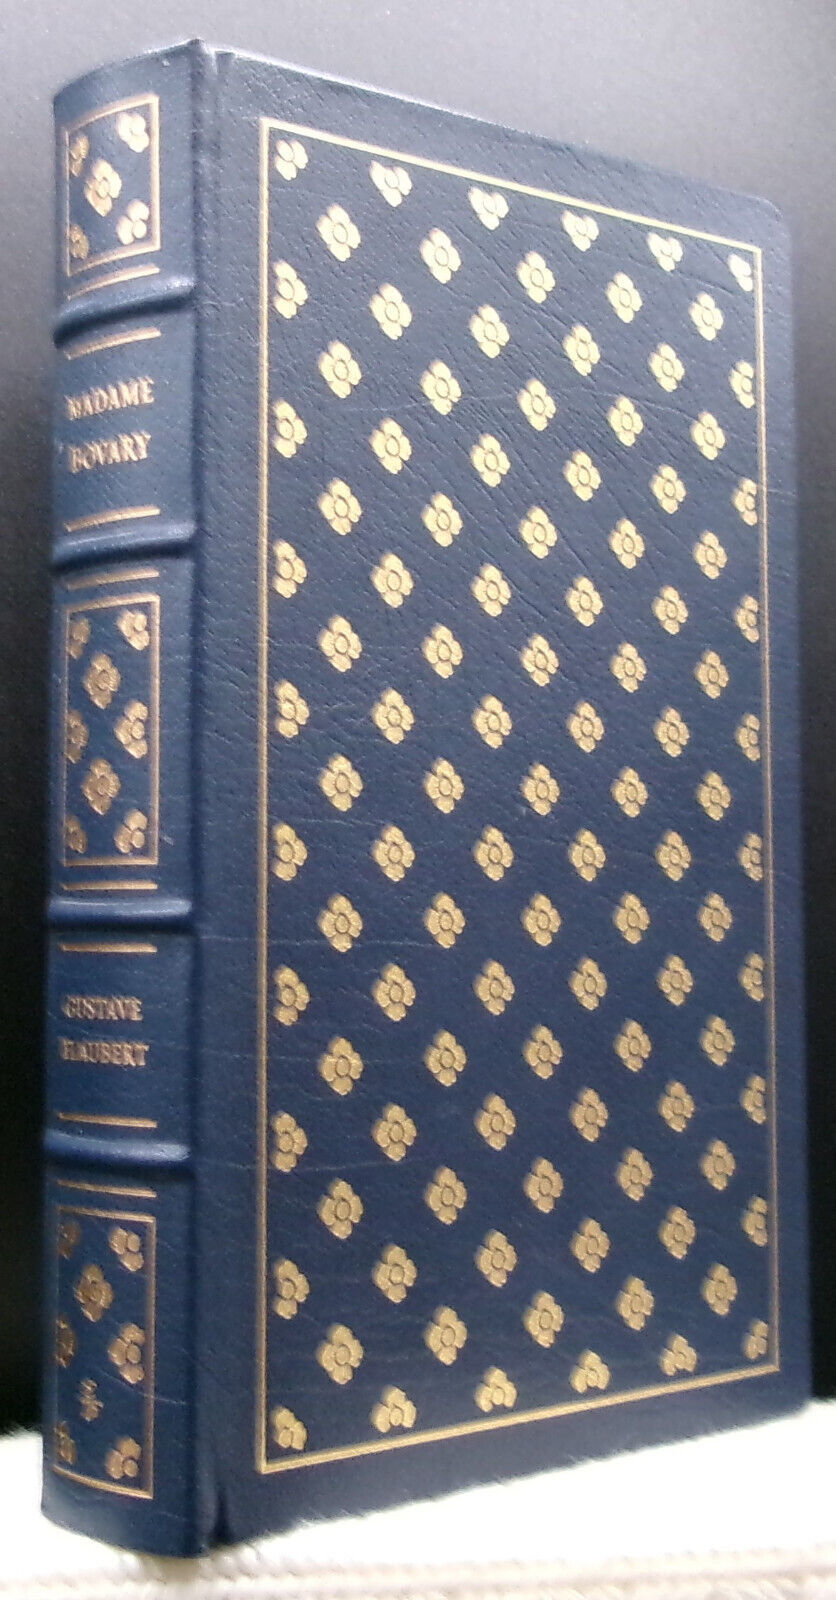 Primary image for Gustave Flaubert MADAME BOVARY Leather Easton Press Illustrated & Portrait Art